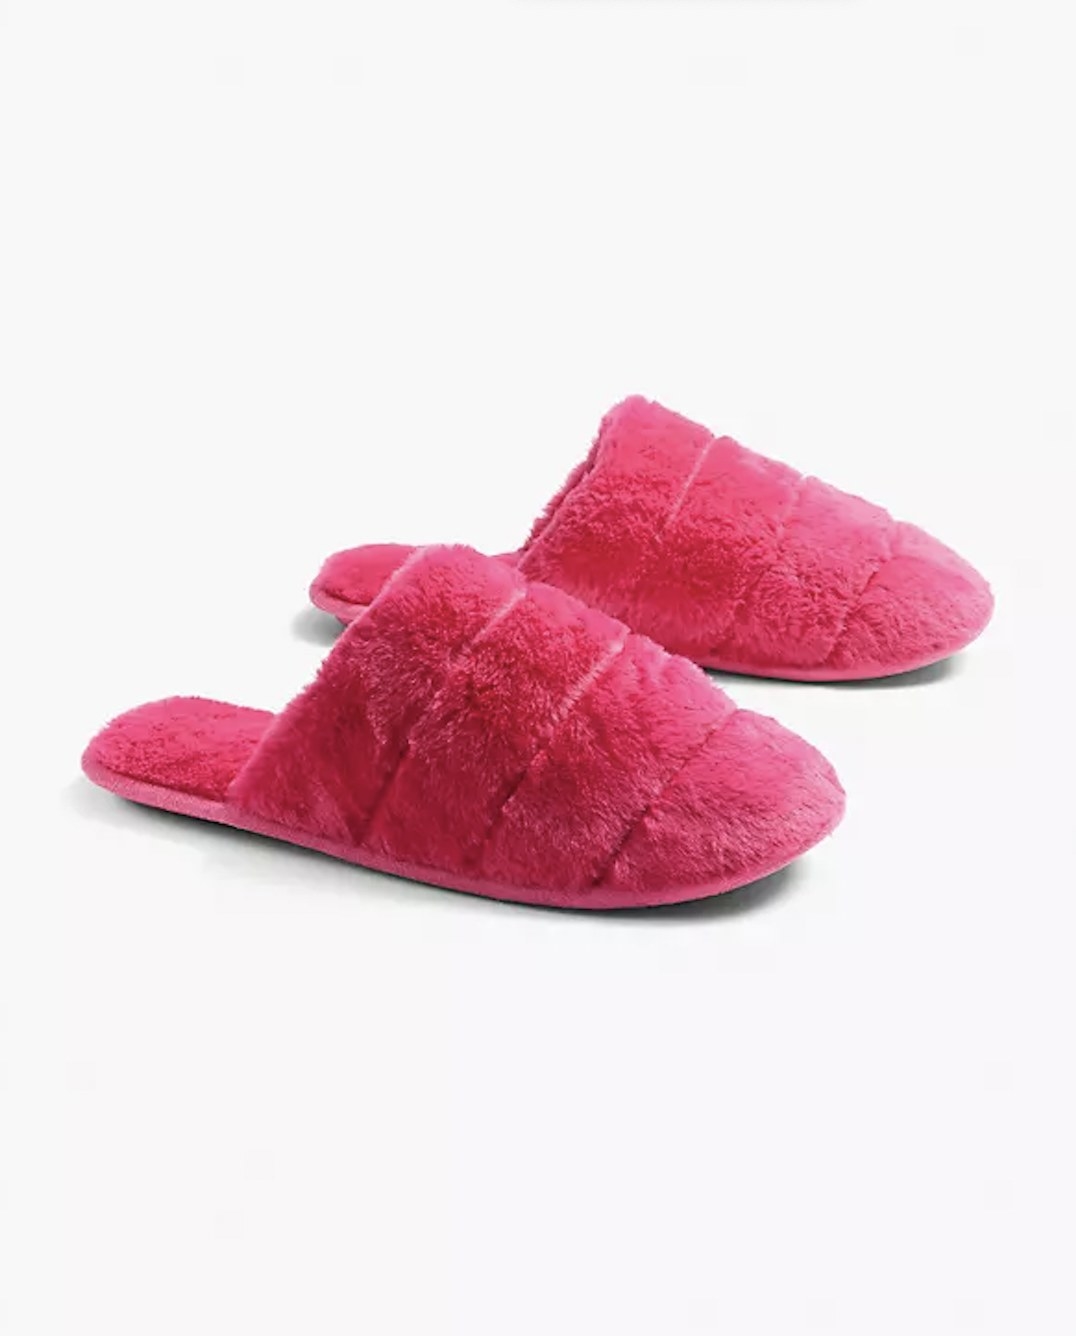 A pair of pink fur slippers